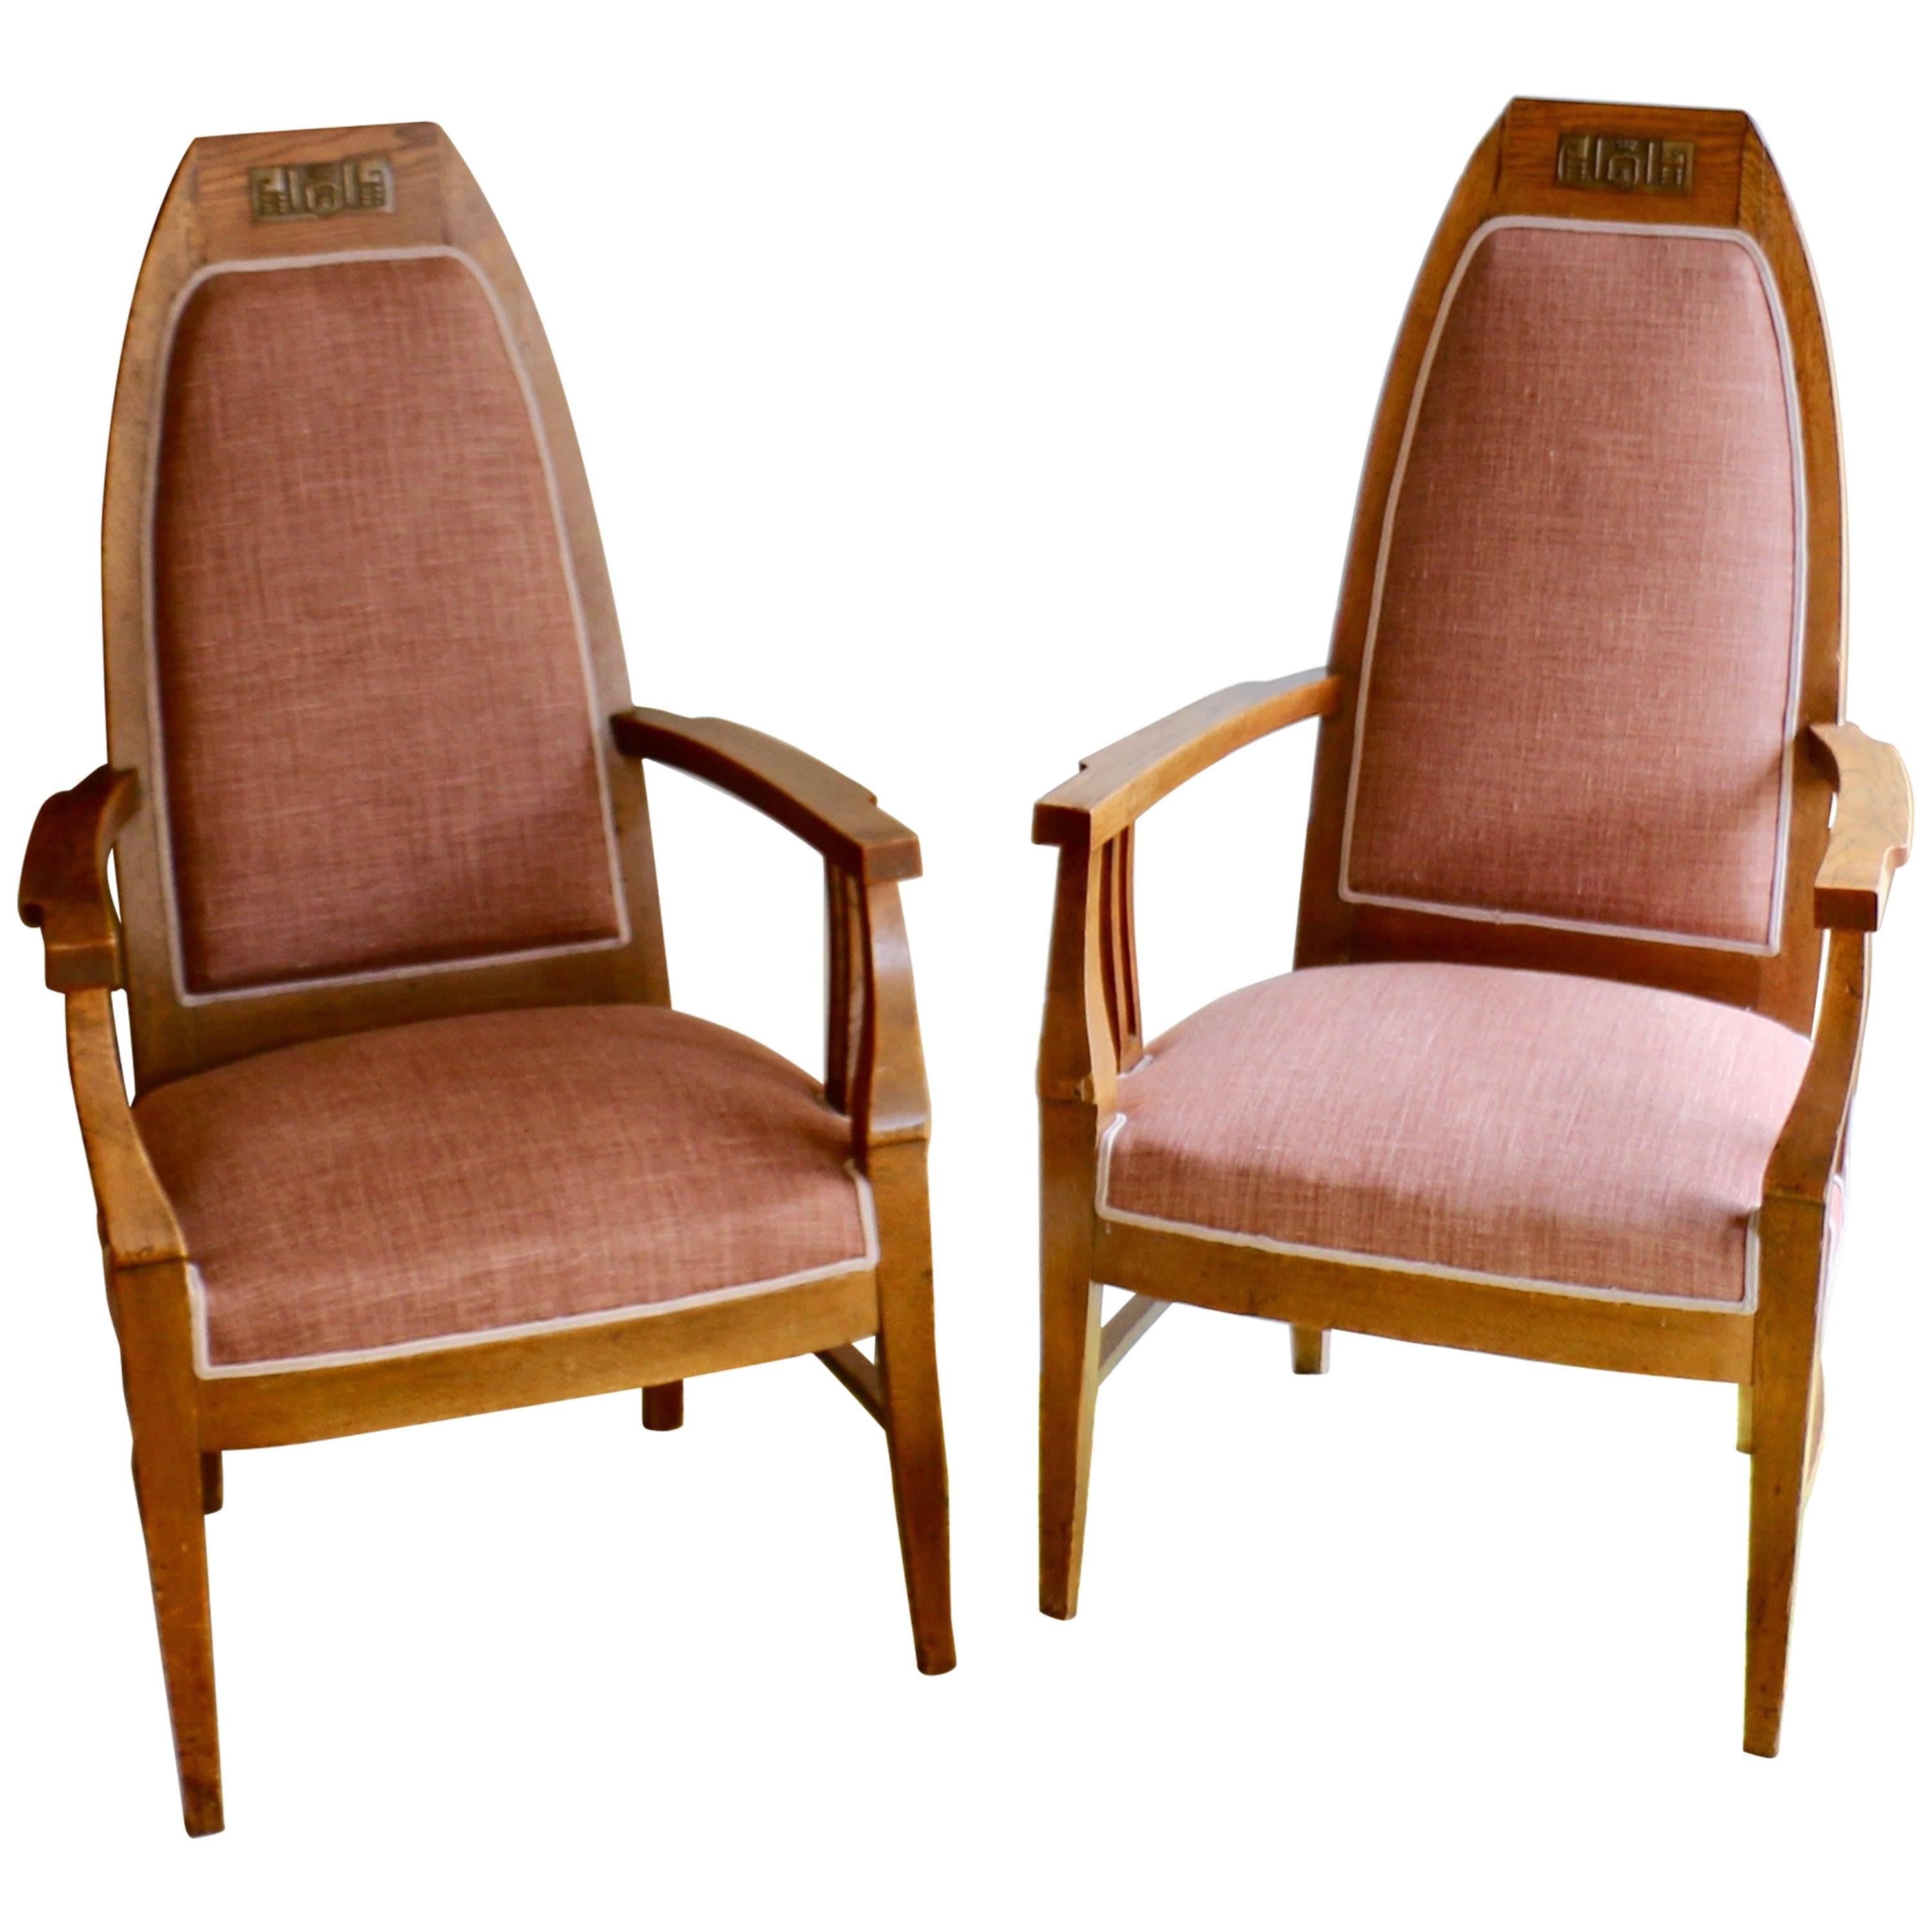 Pair of Oak Armchairs, Finland, circa 1940 For Sale